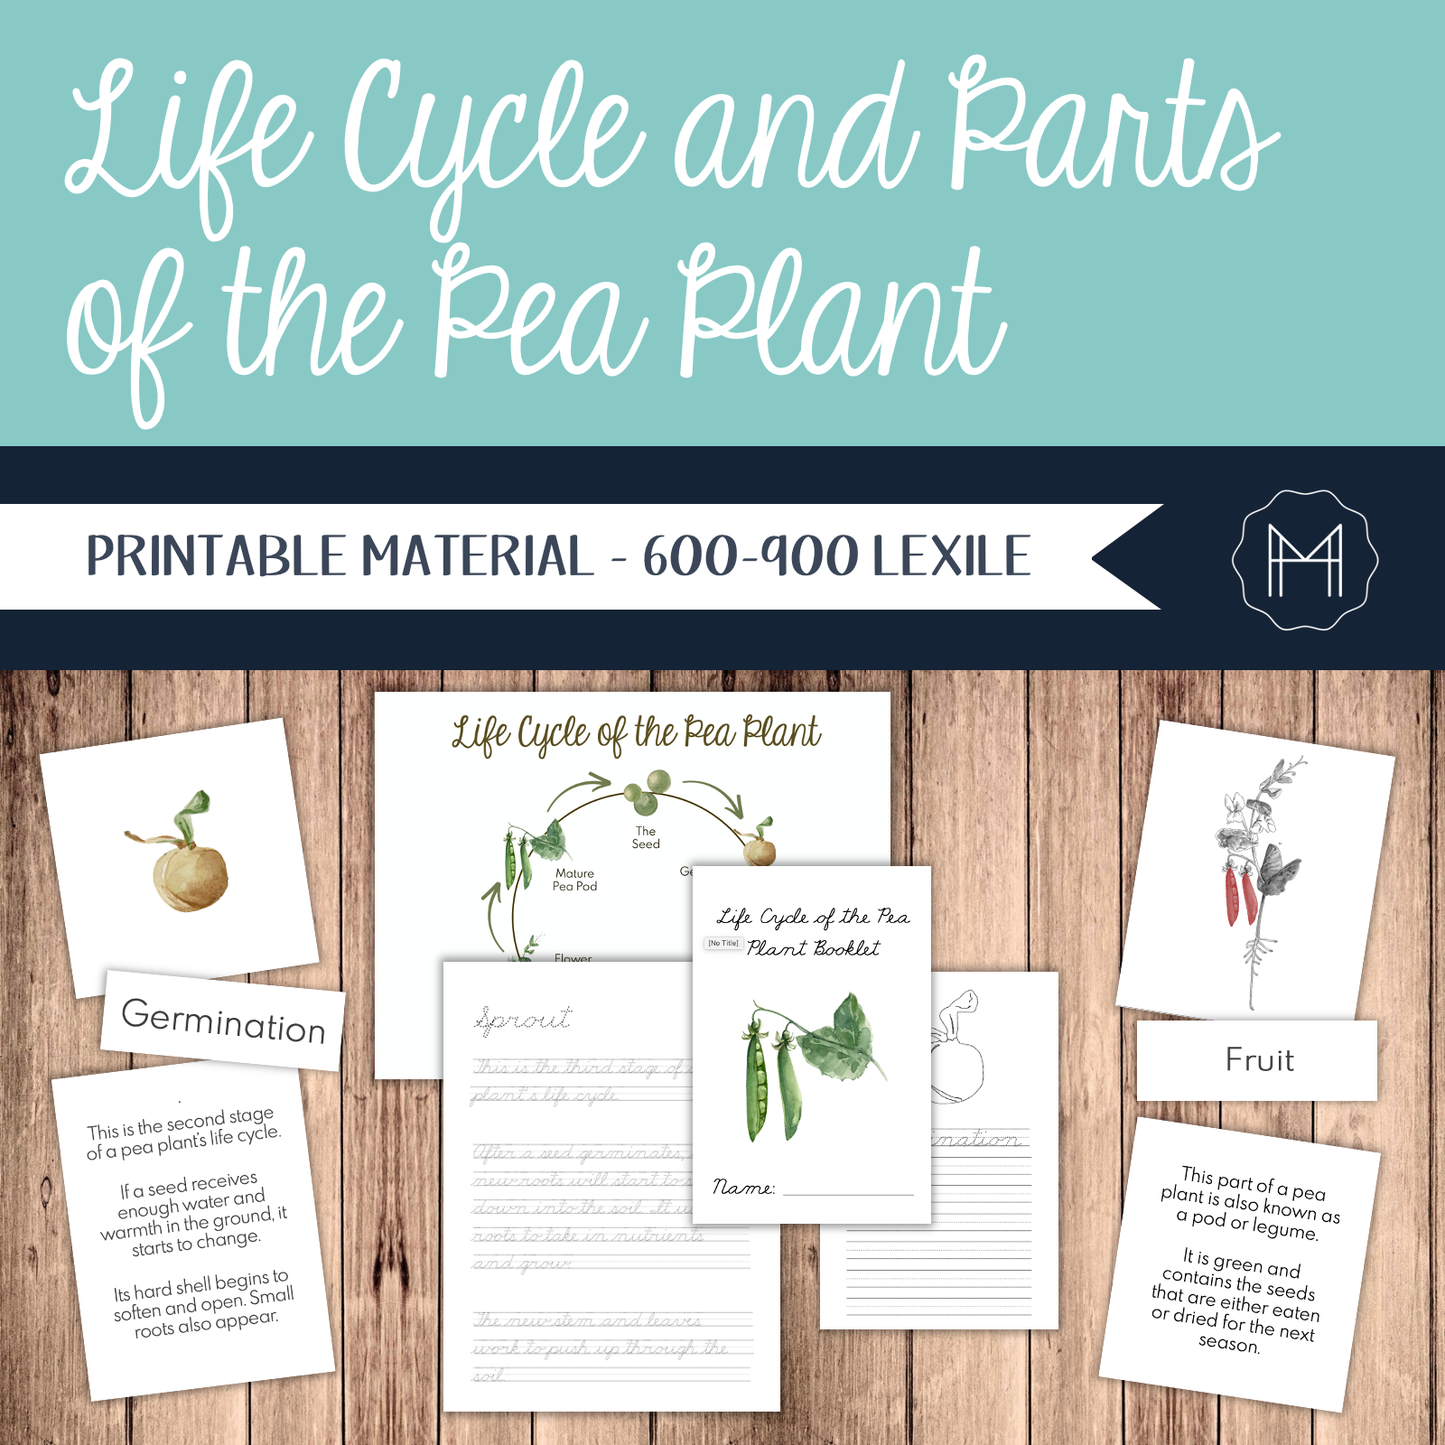 Life Cycle and Parts of the Pea Plant